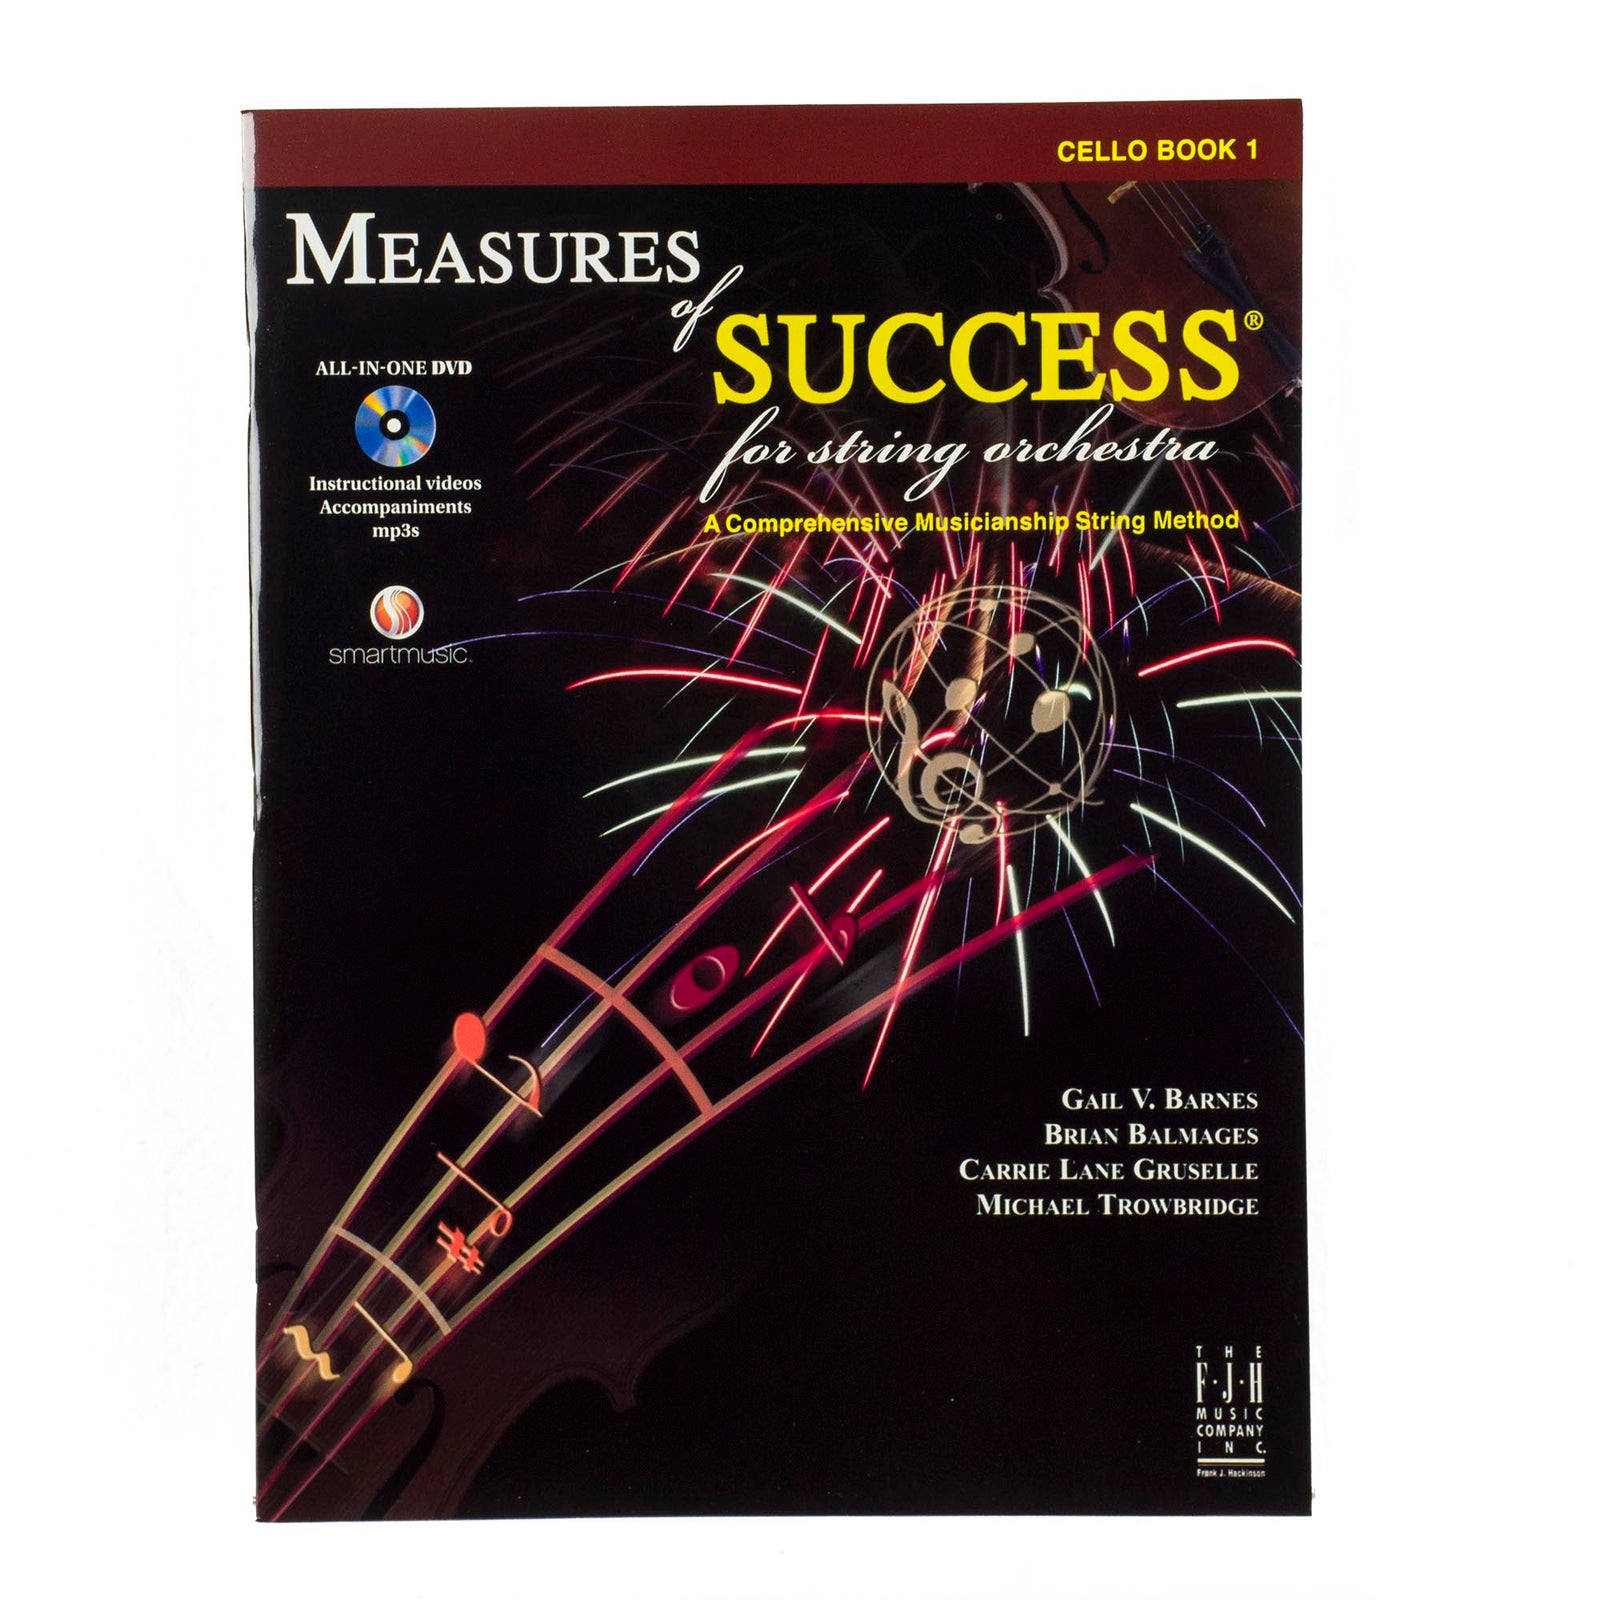 Measures Of Success For String Orchestra - Cello Book 1